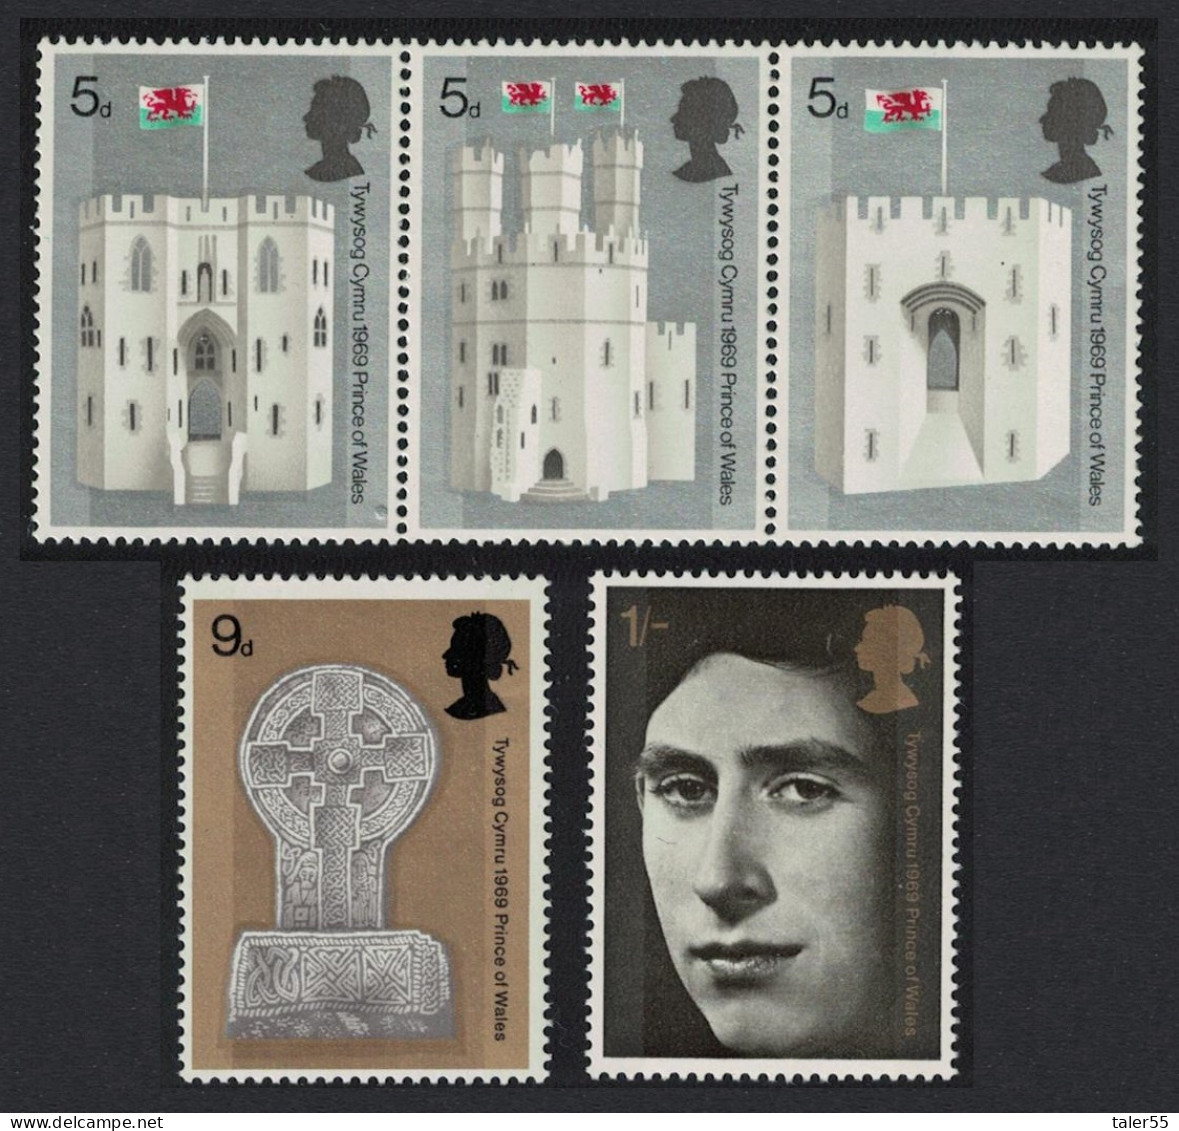 Great Britain Investiture Of The Prince Of Wales 5v 1969 MNH SG#802-806 Sc#597-599 - Unused Stamps